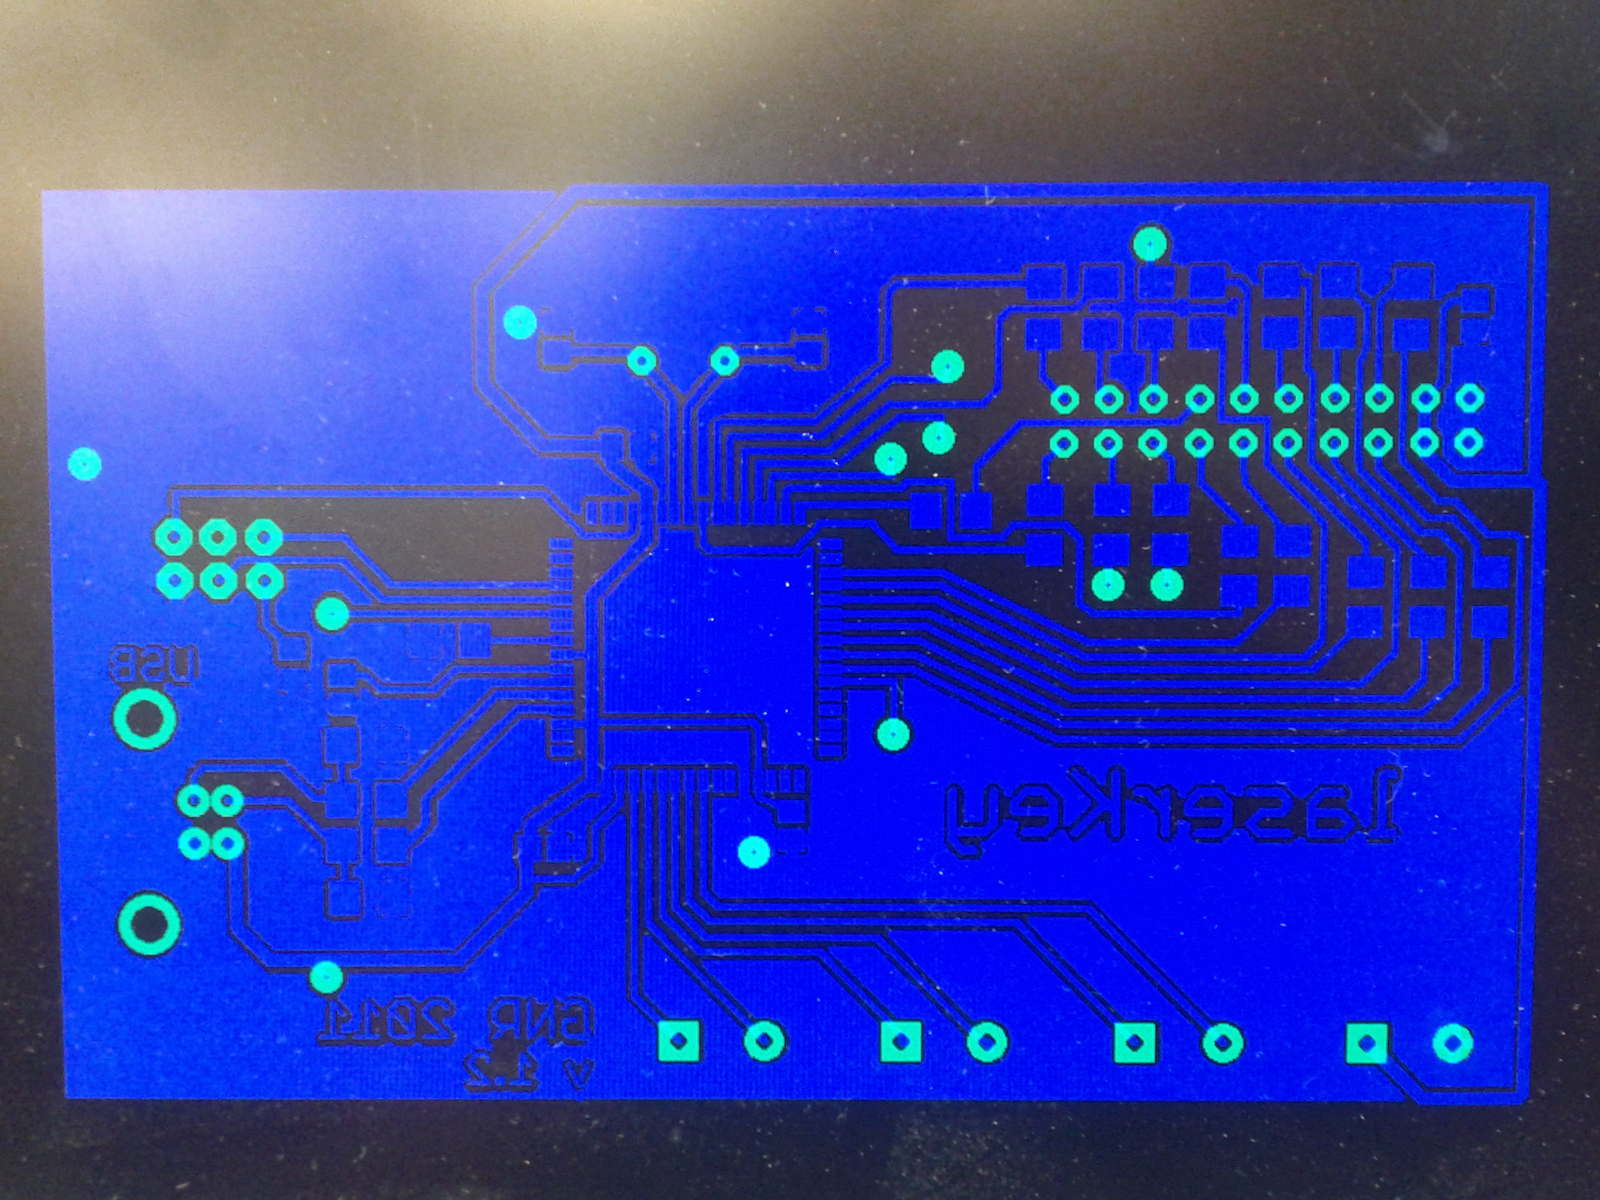 The bottom layer of the circuit board (Picture taken of the print computer’s screen)